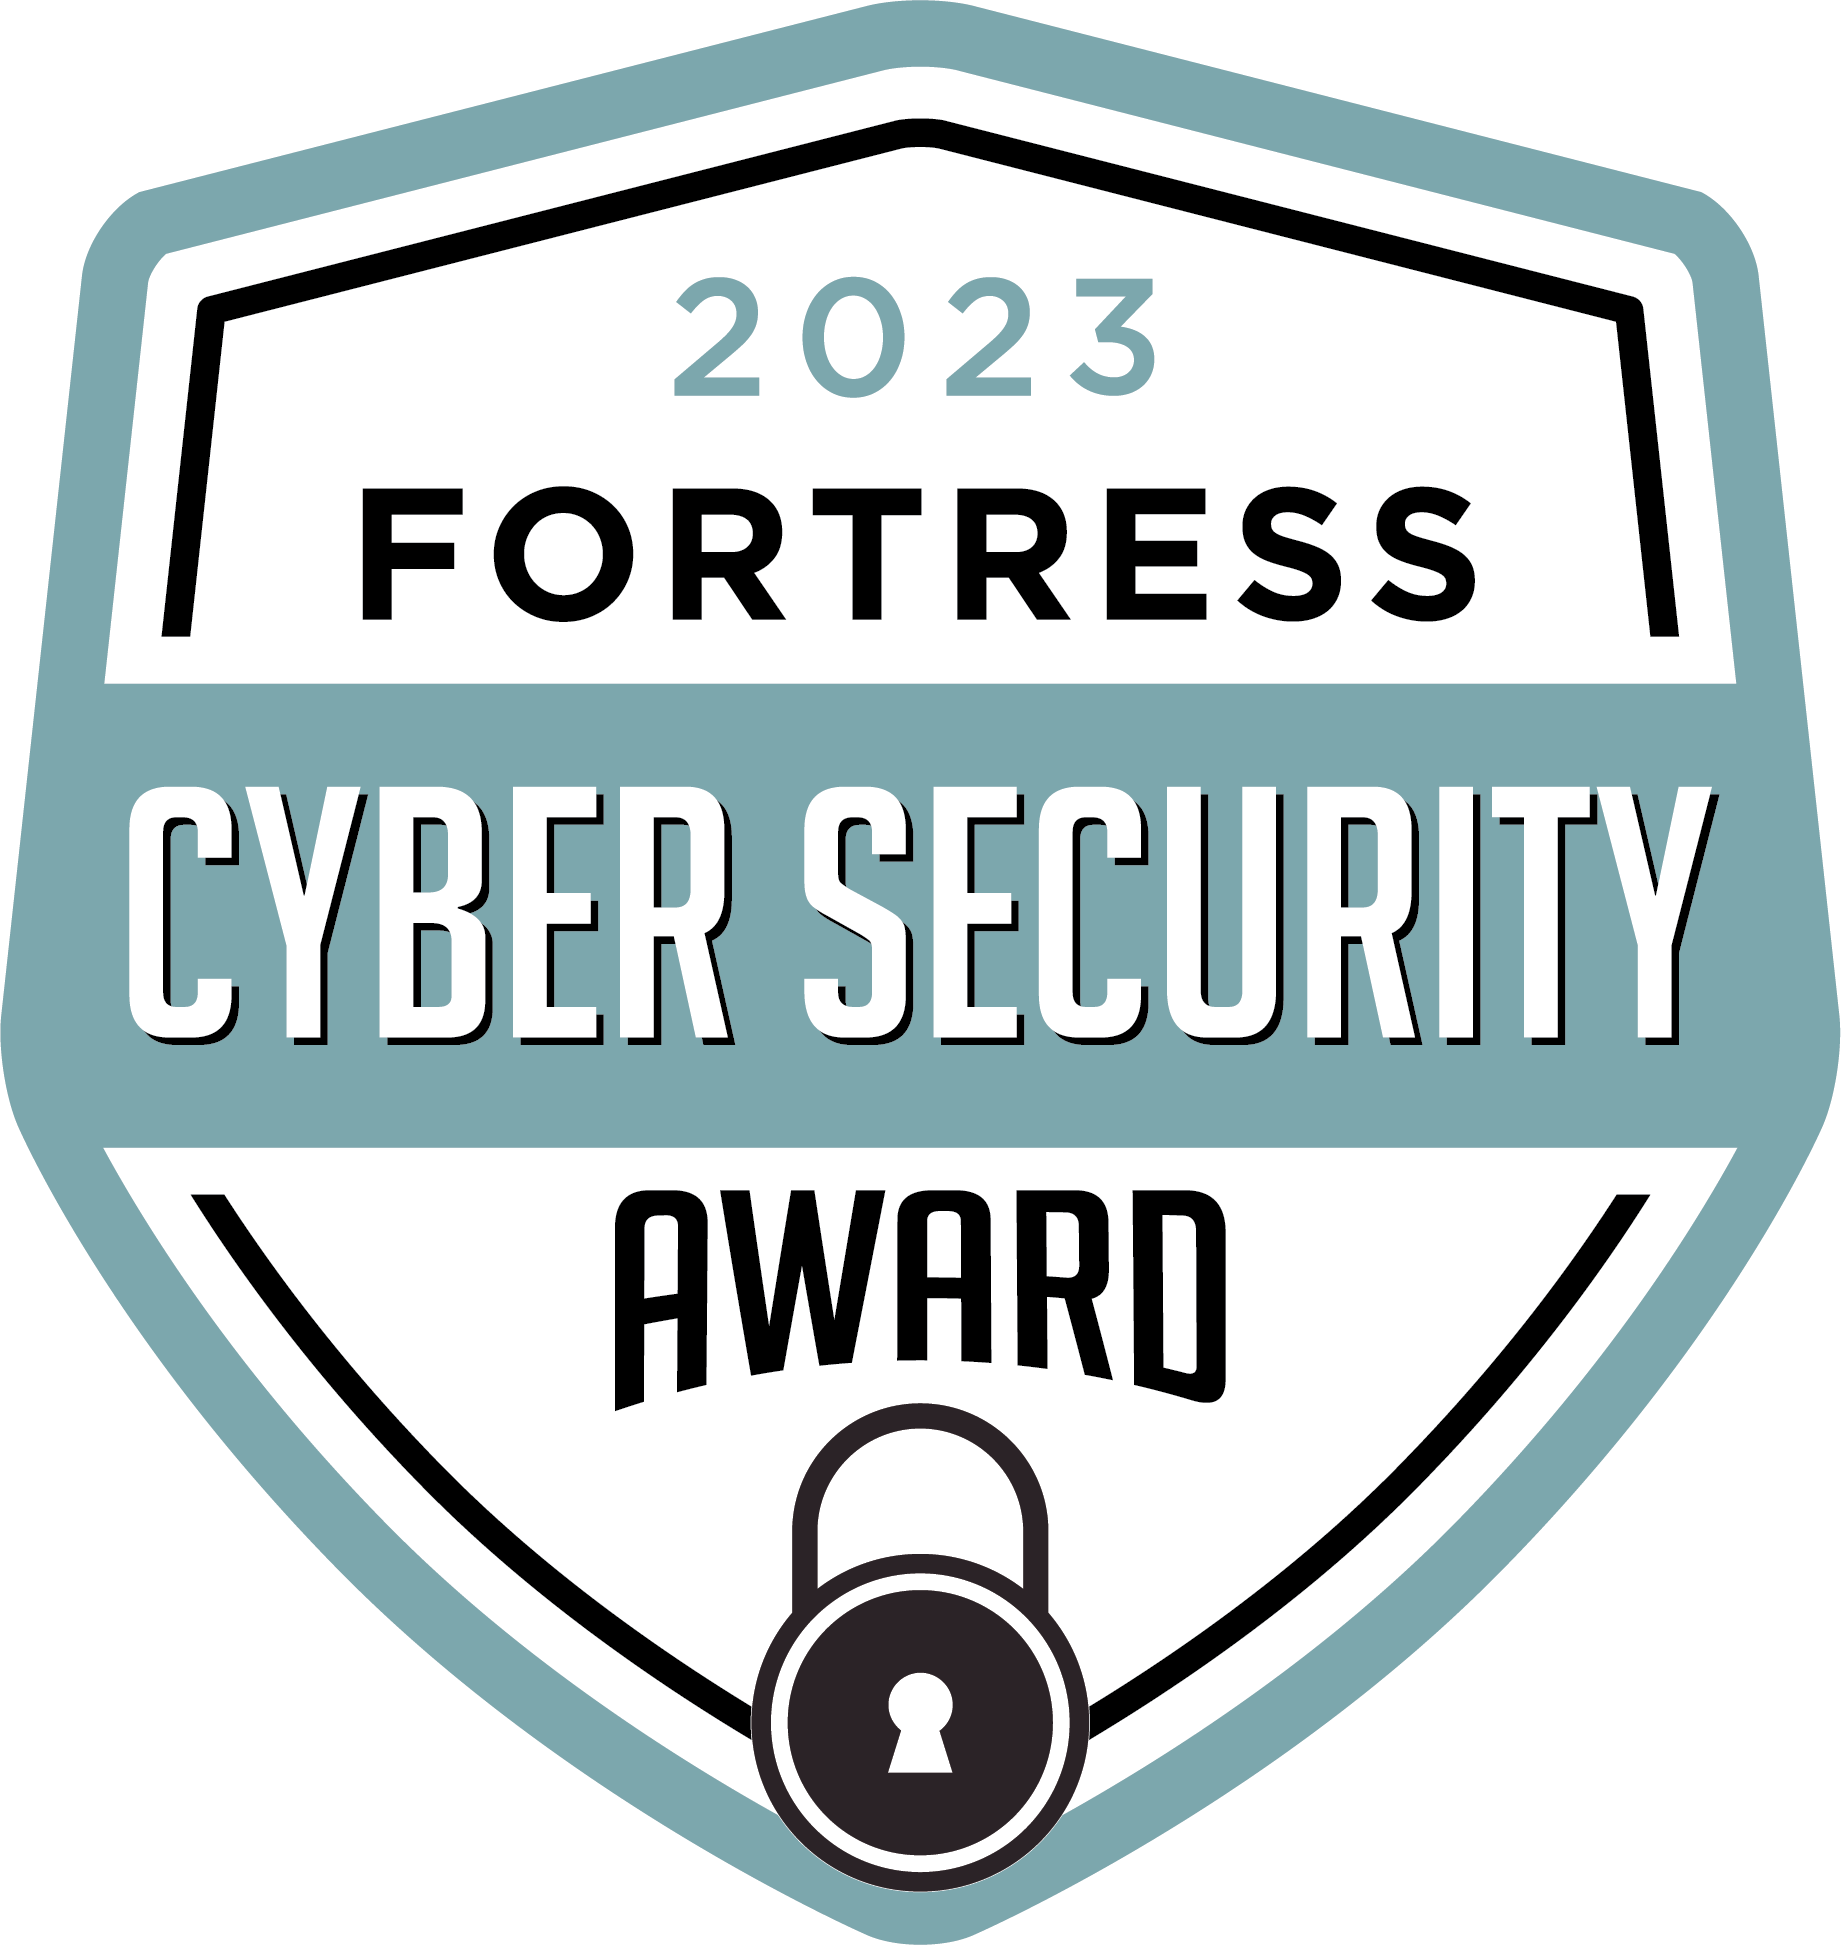 2023 Fortress Cyber Security award badge